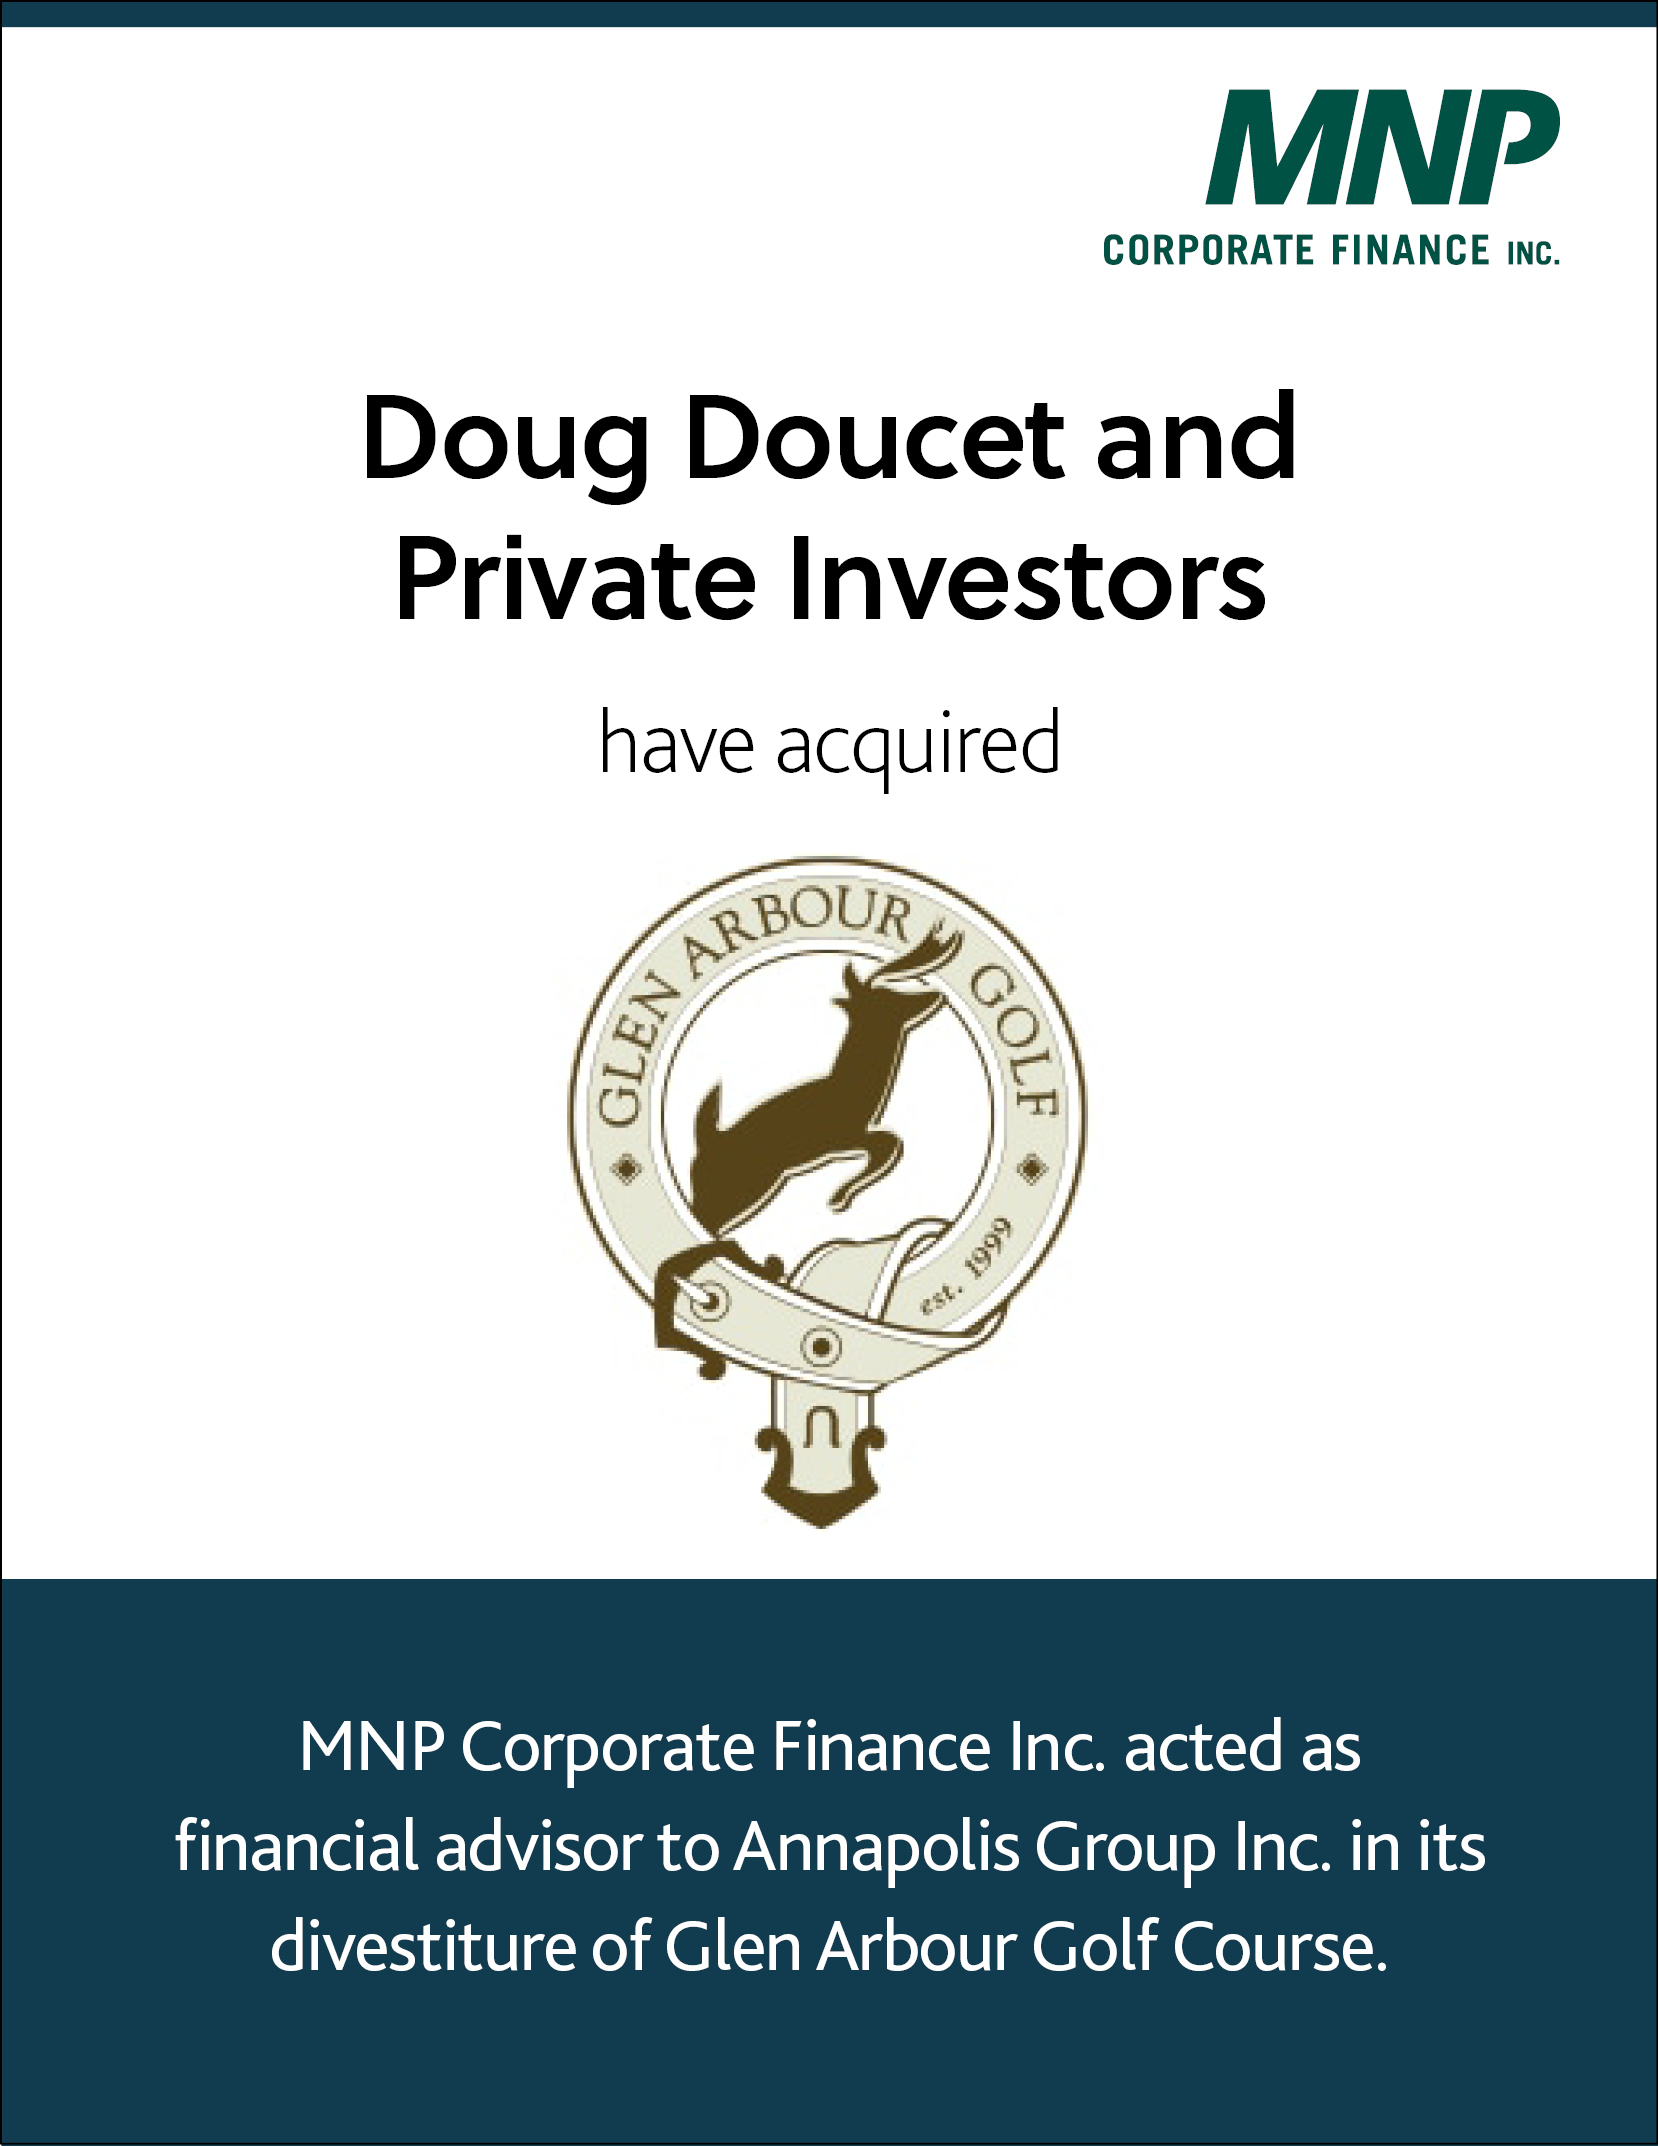 Doug Doucet and Private Investors have acquired Glen Arbour Golf Course